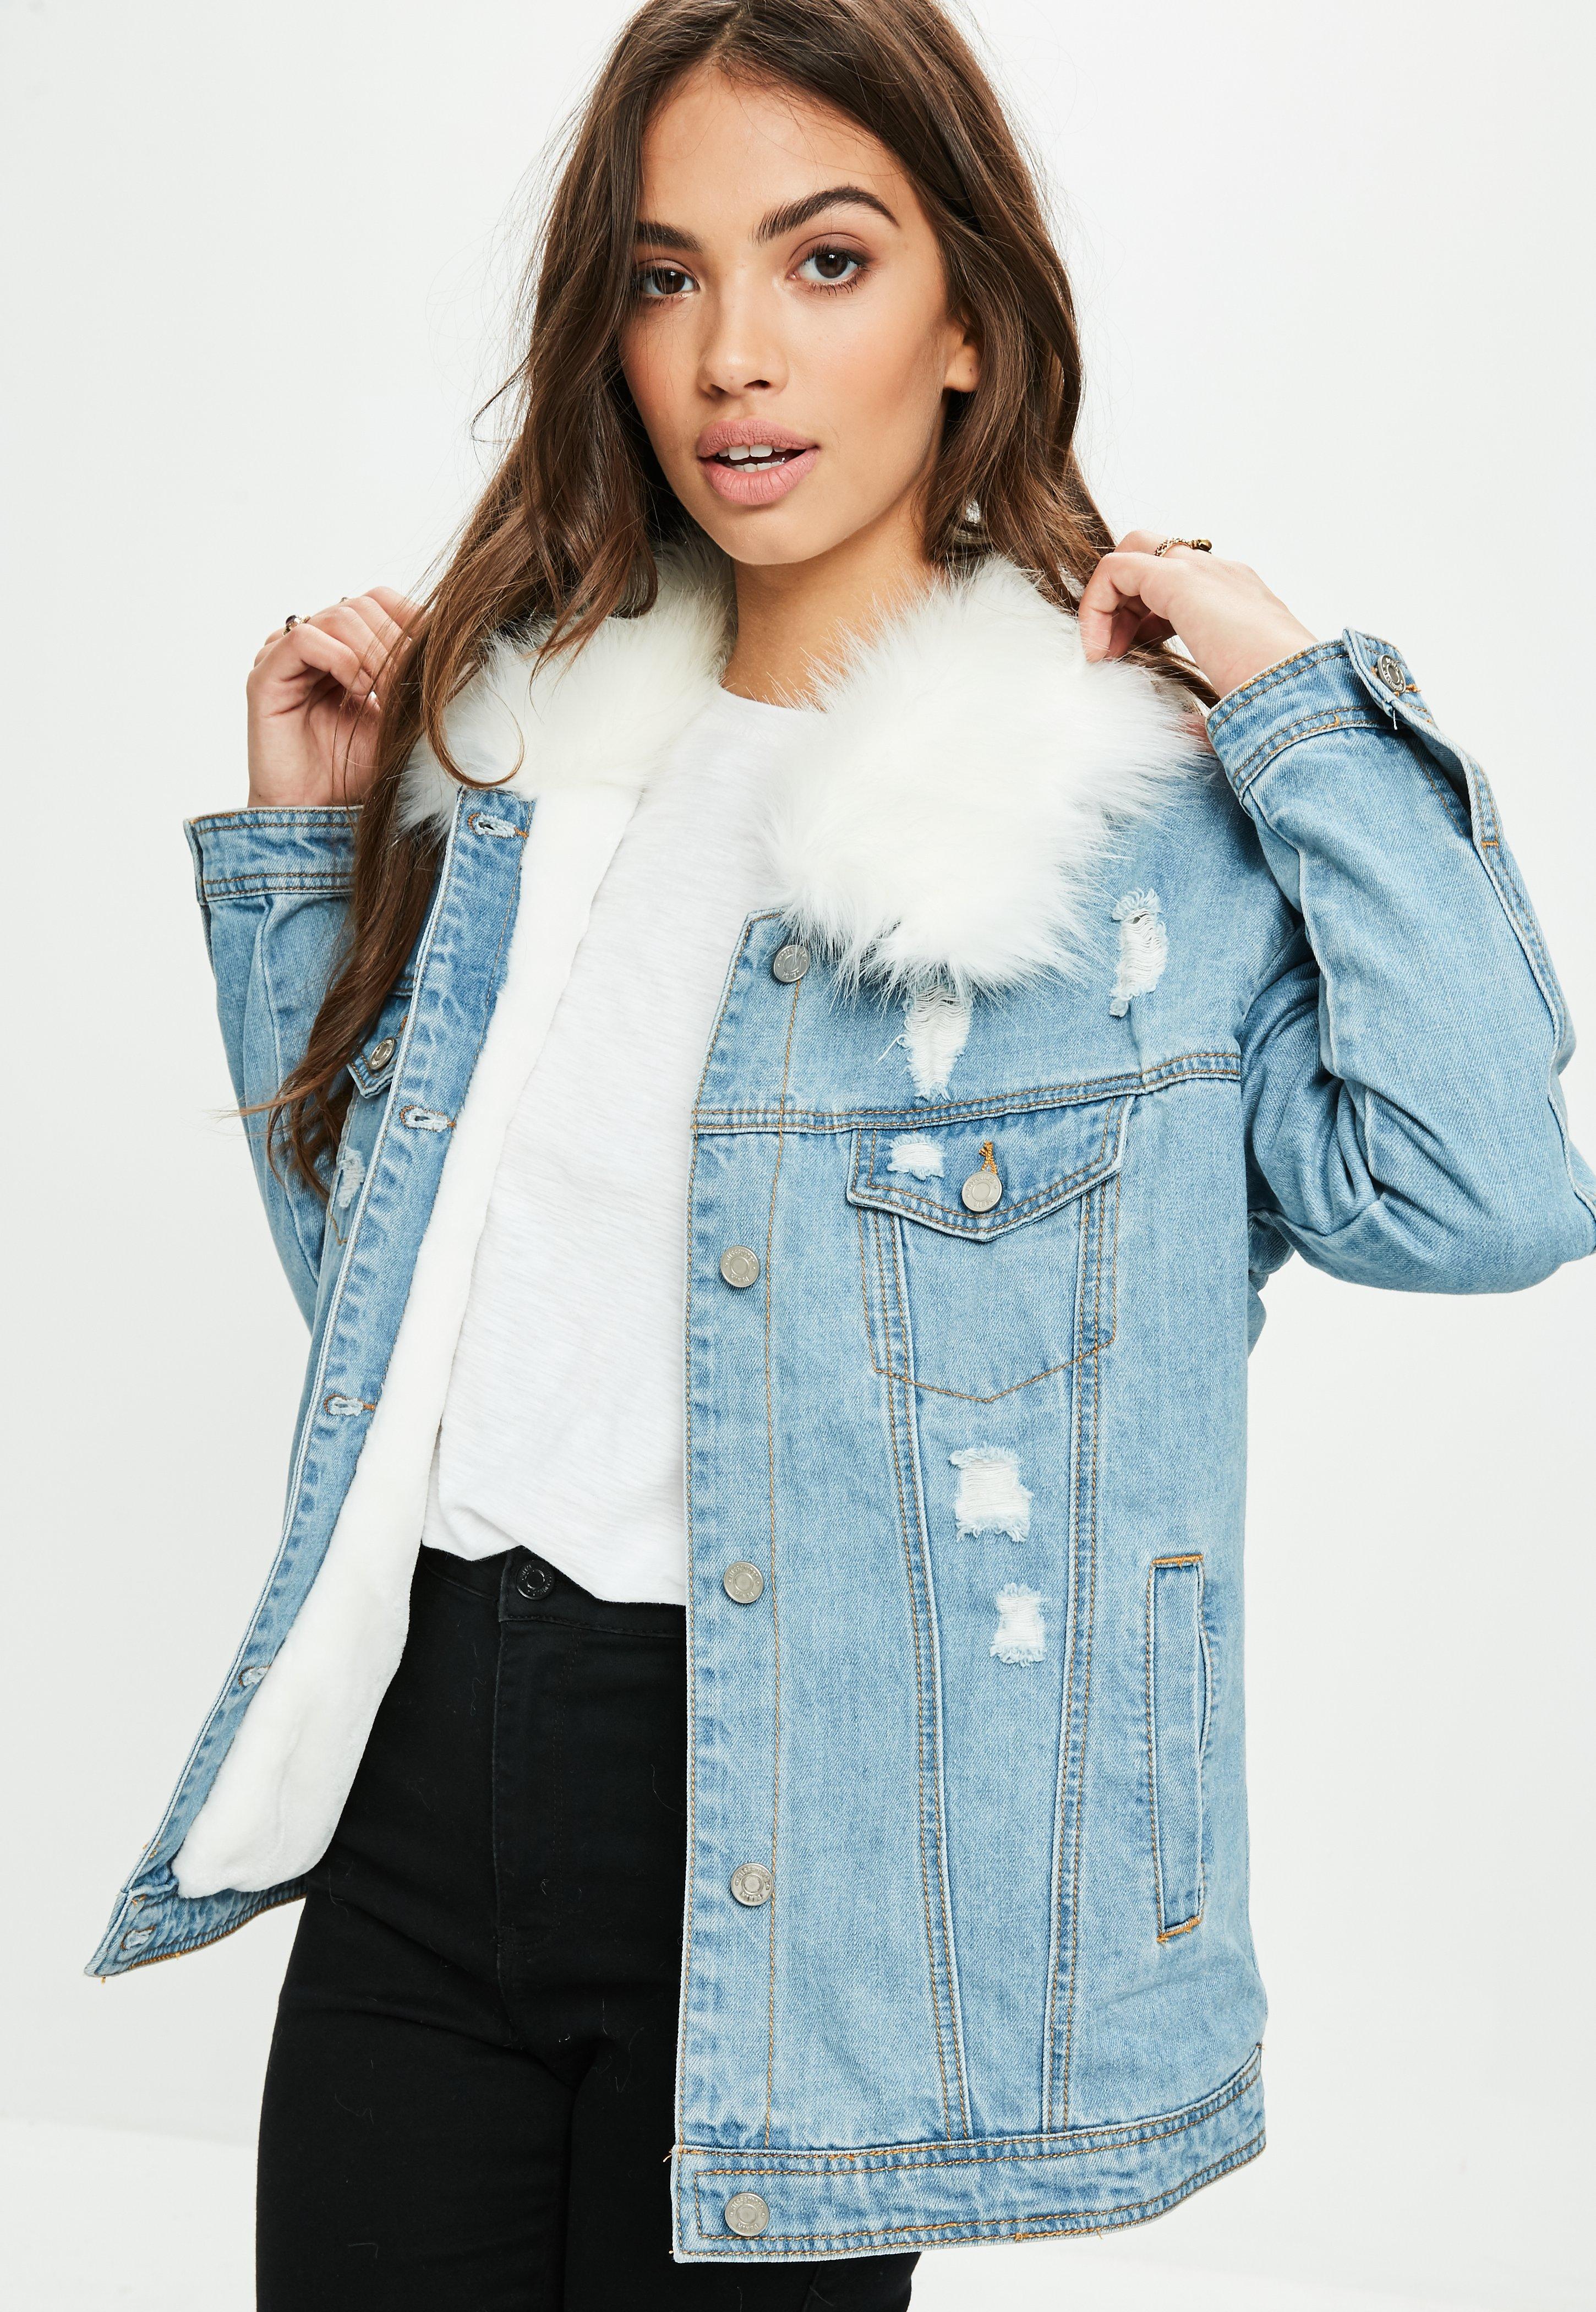 jean jacket with white collar